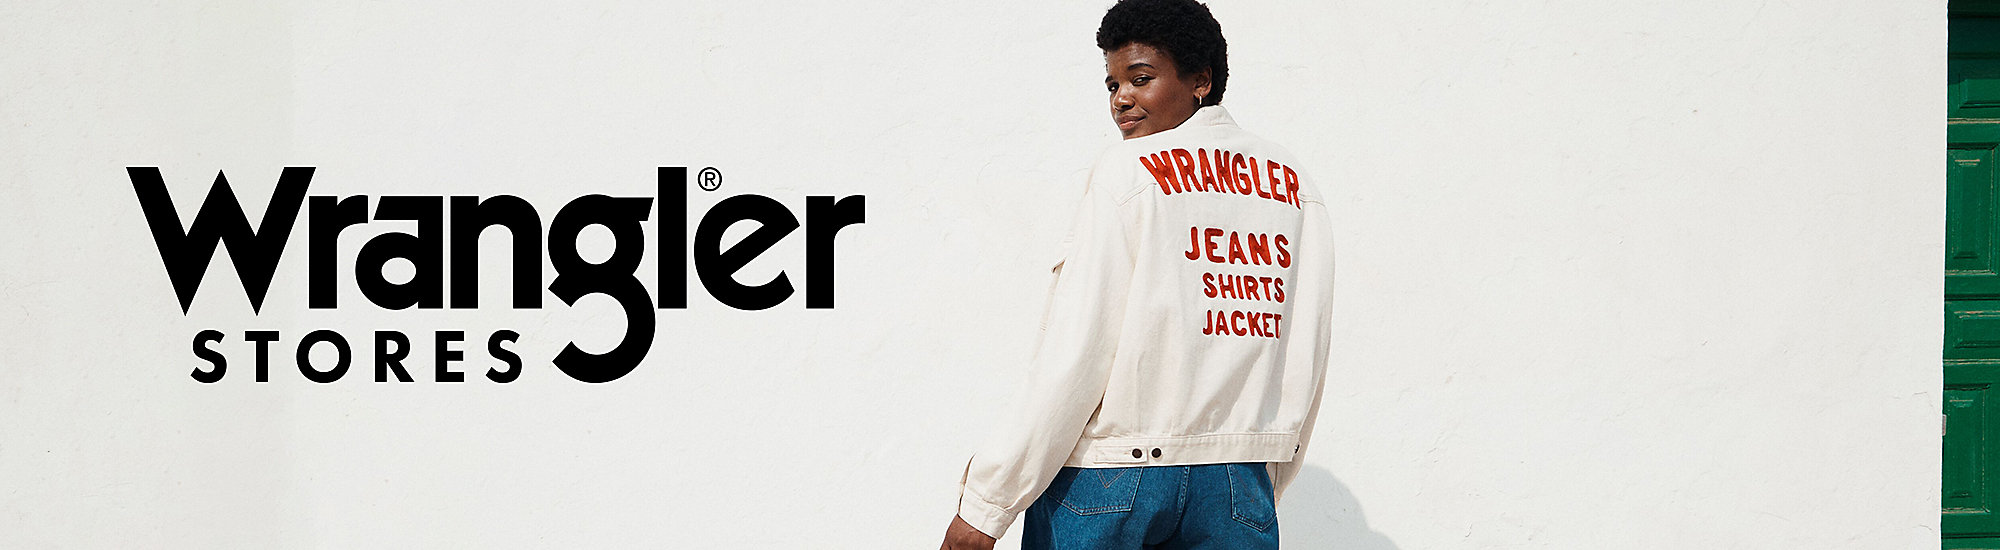 Wrangler Stores | With authentic style woven into each piece, Wrangler® clothing combines quality, craftsmanship and superior design into both long-loved and contemporary looks.